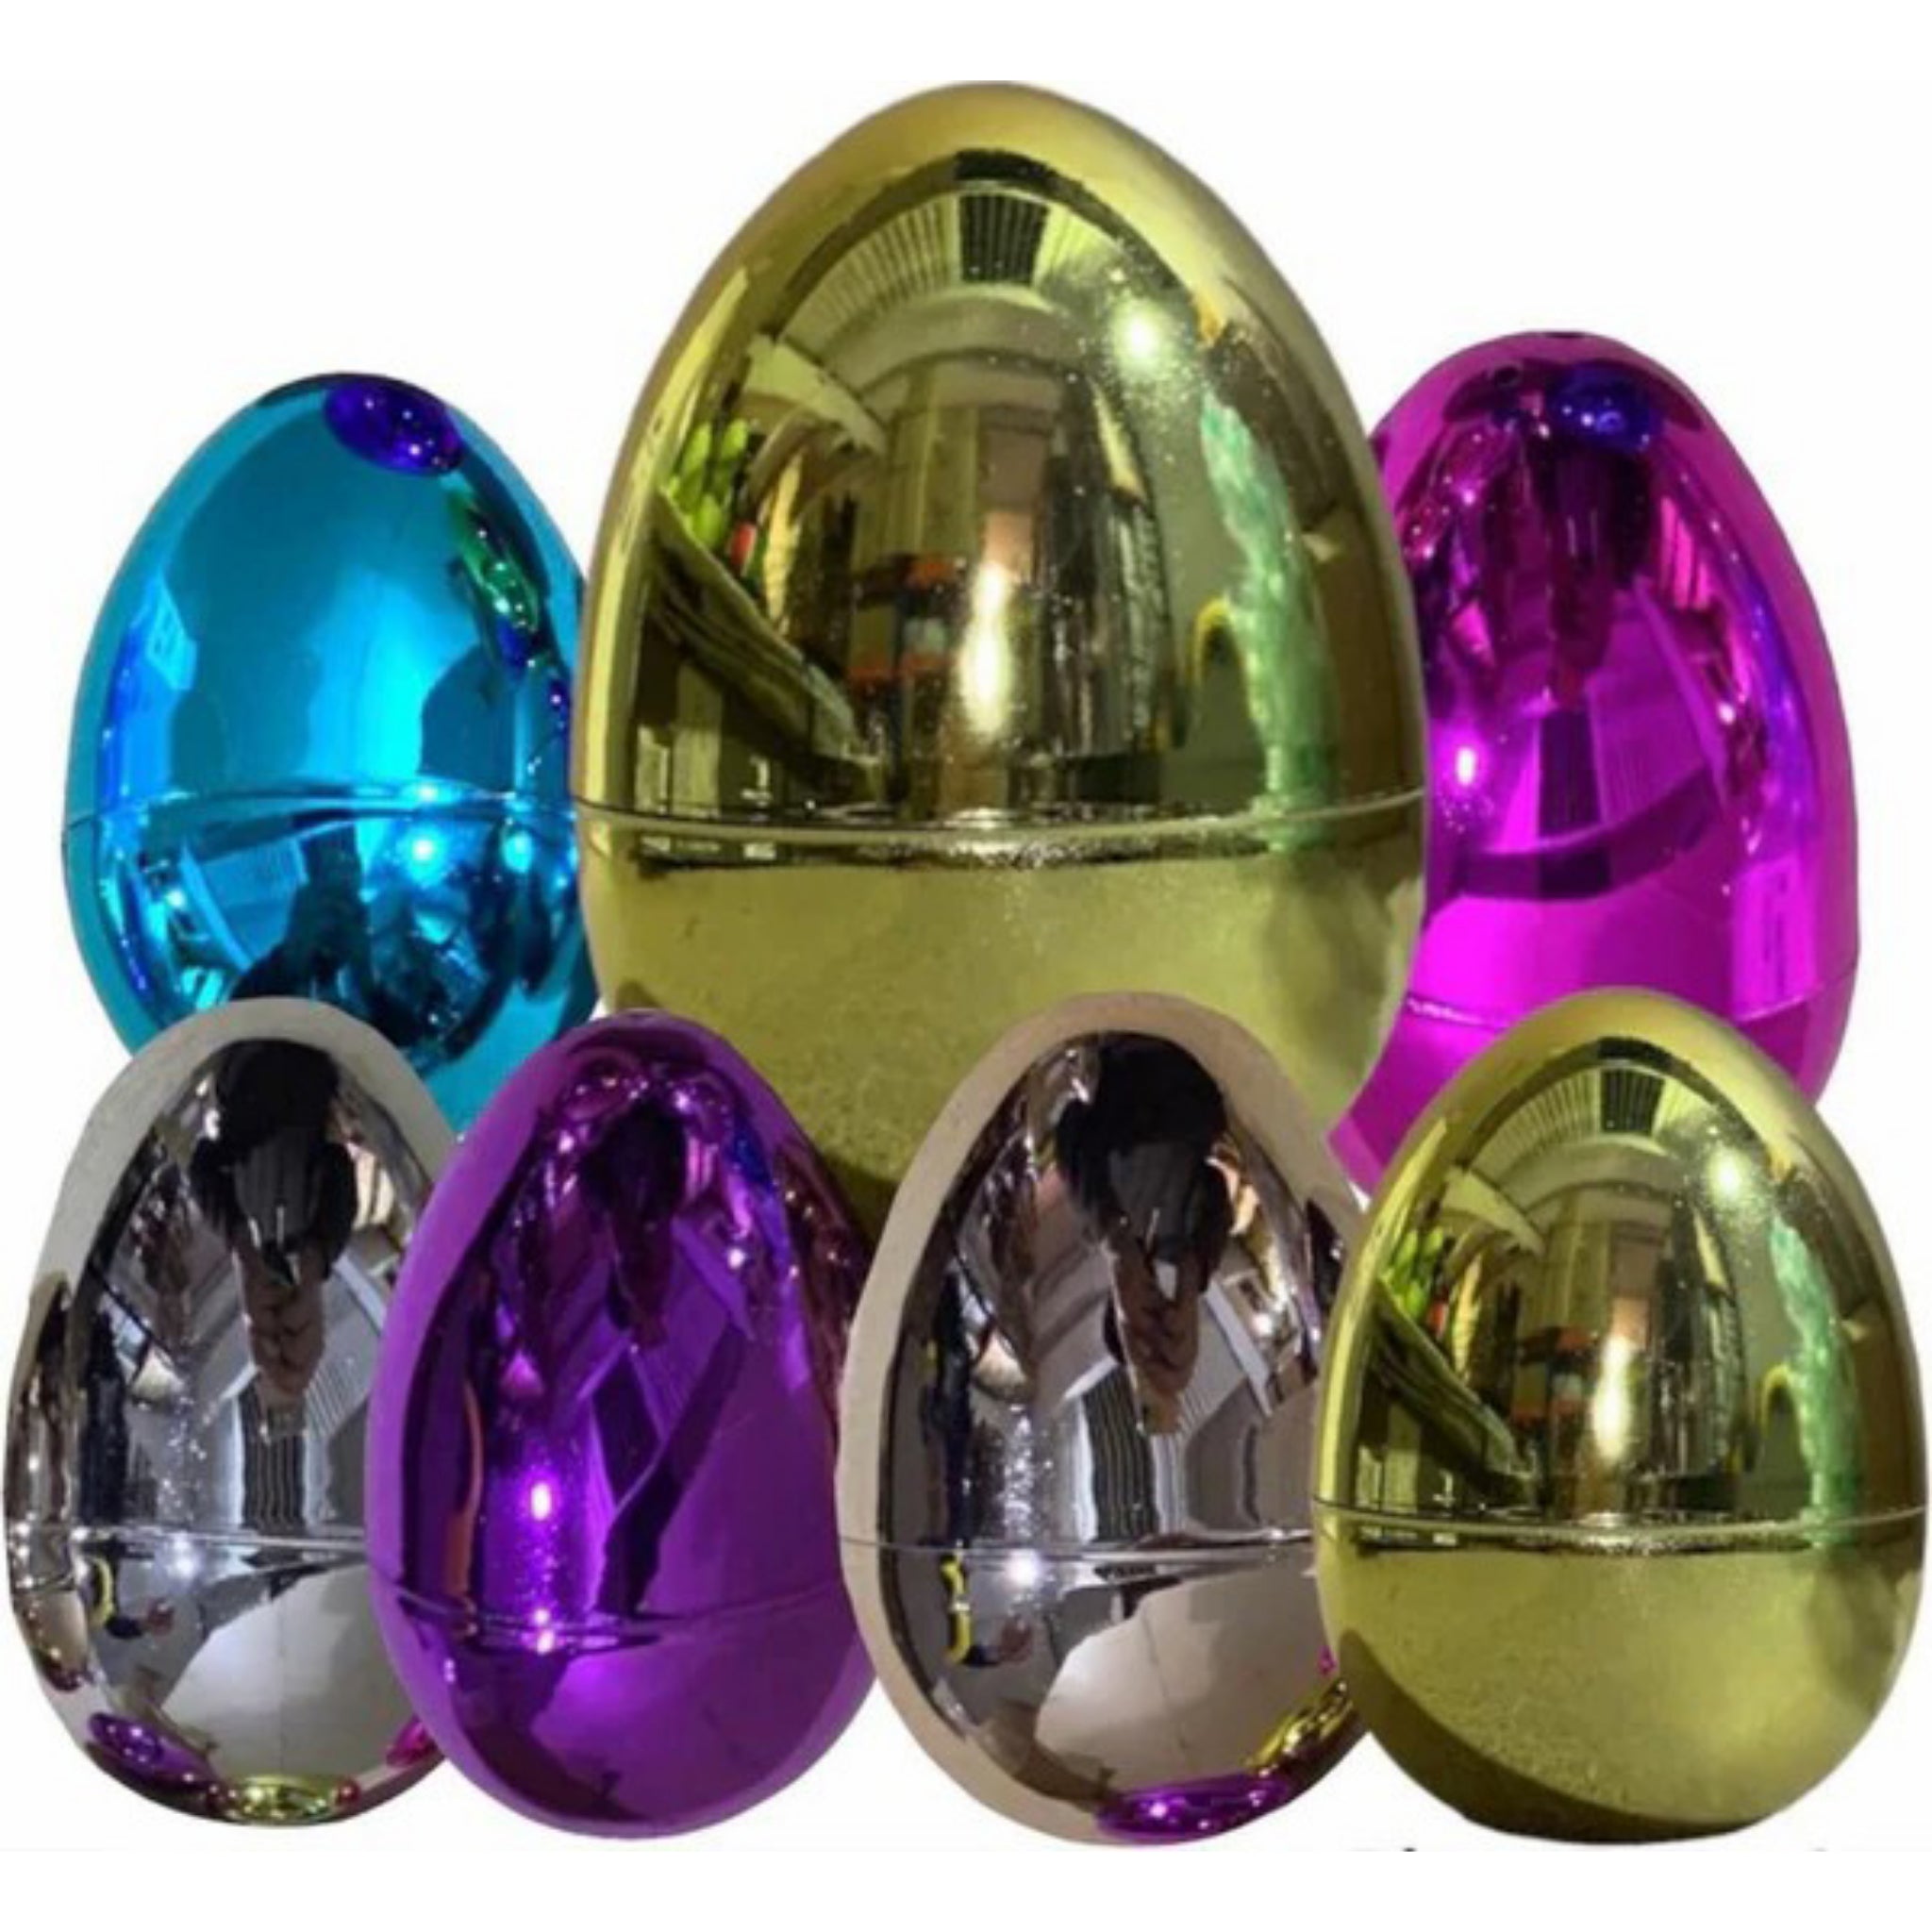 Beclen Harp 7pc Giant Easter Hollow/Fillable Shiny Plastic Filler Egg Hunt Decoration- Perfect Gift Treat